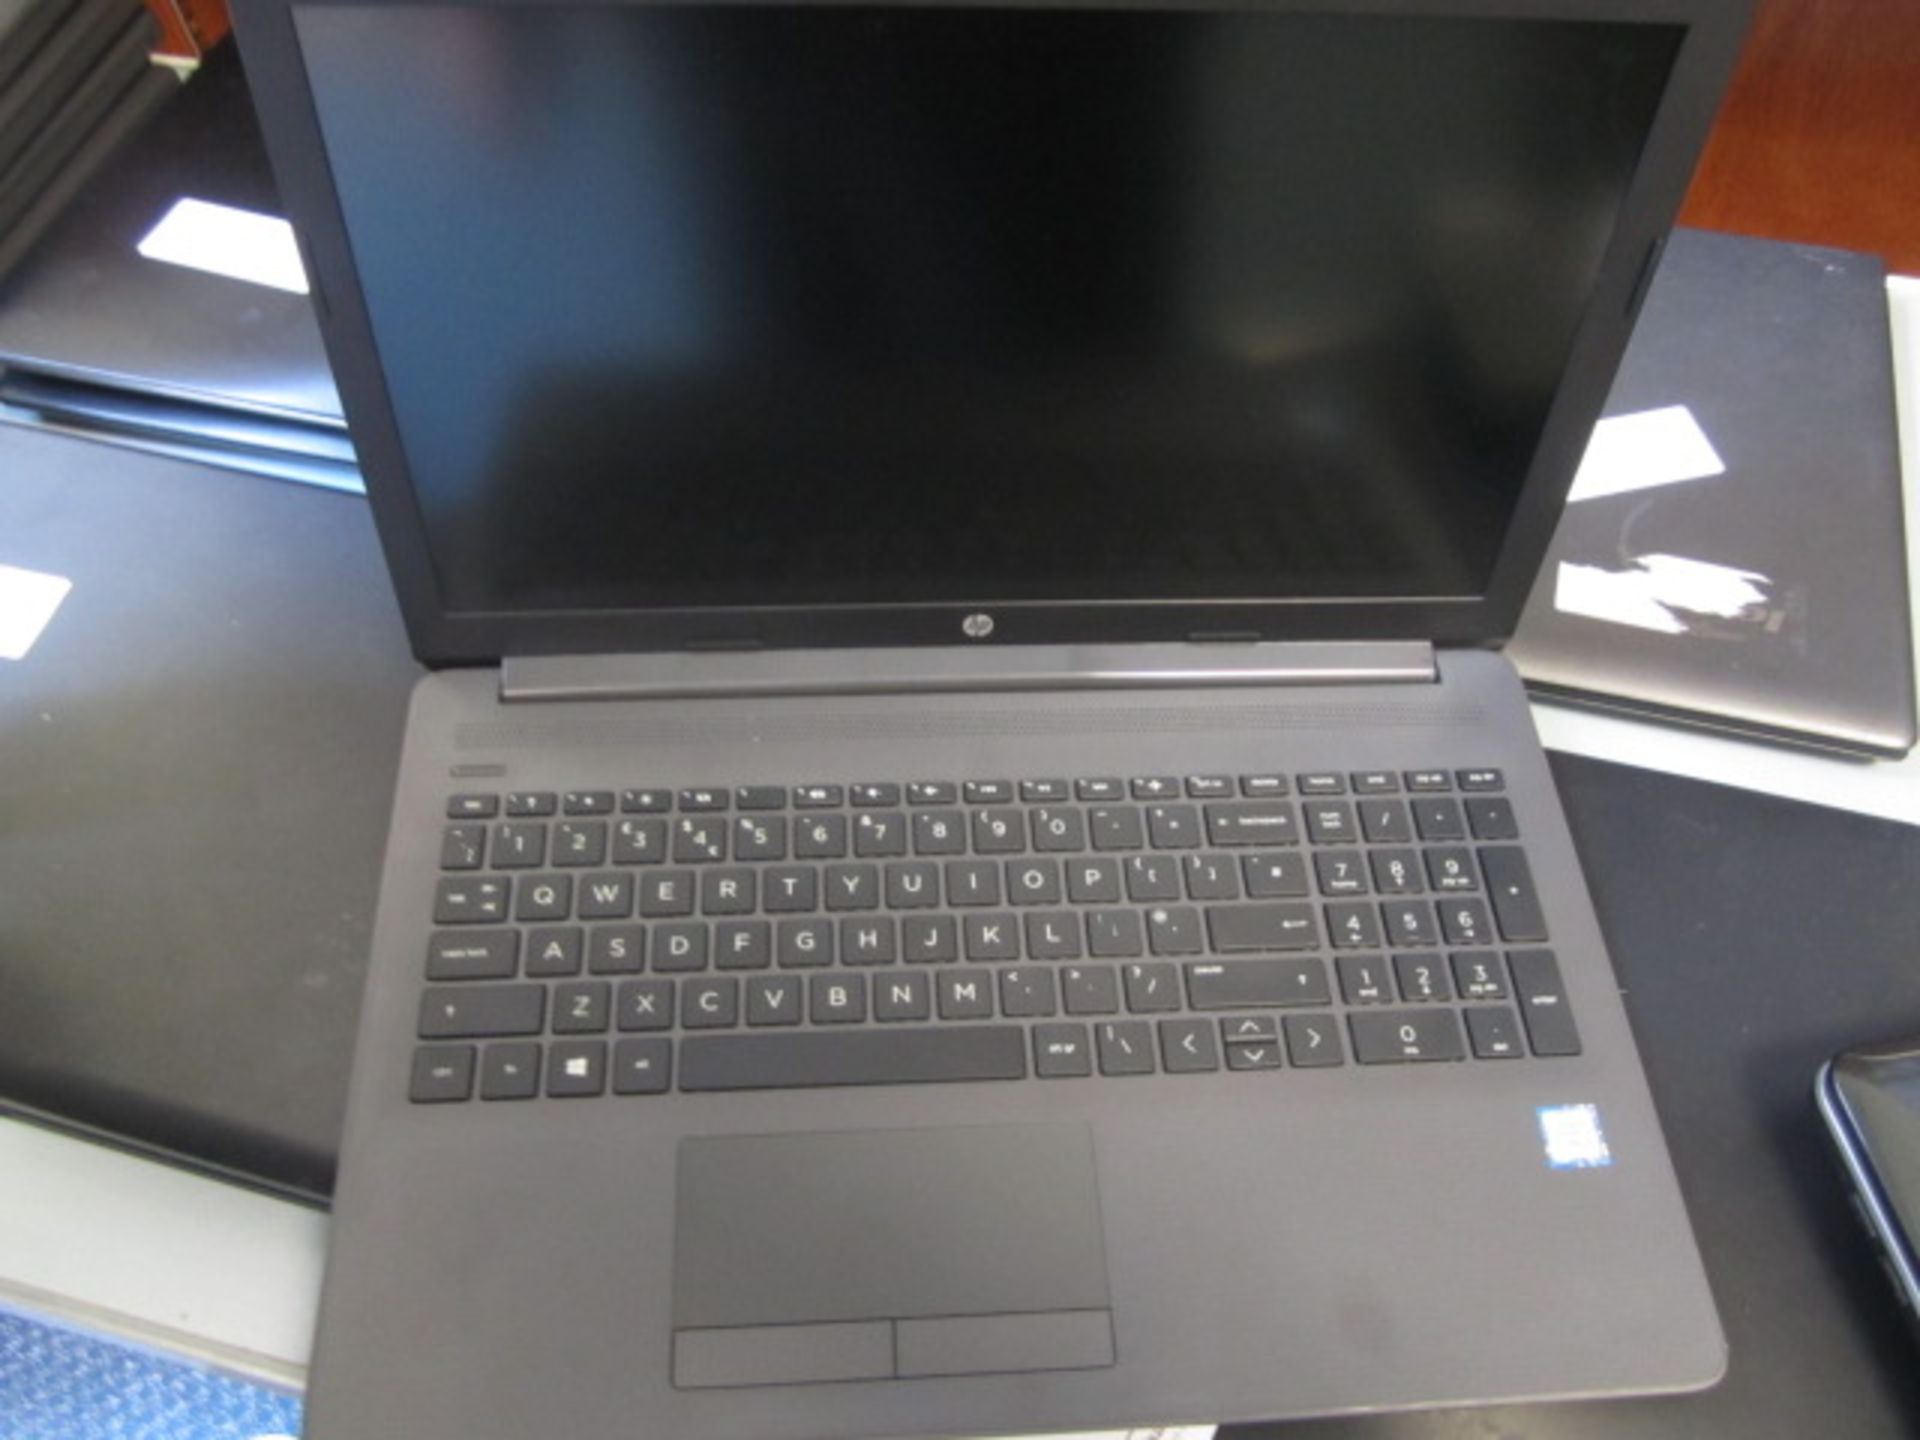 HP 250 G7 Core i5 laptop and case. Located at main schoolPlease note: This lot, for VAT purposes, is